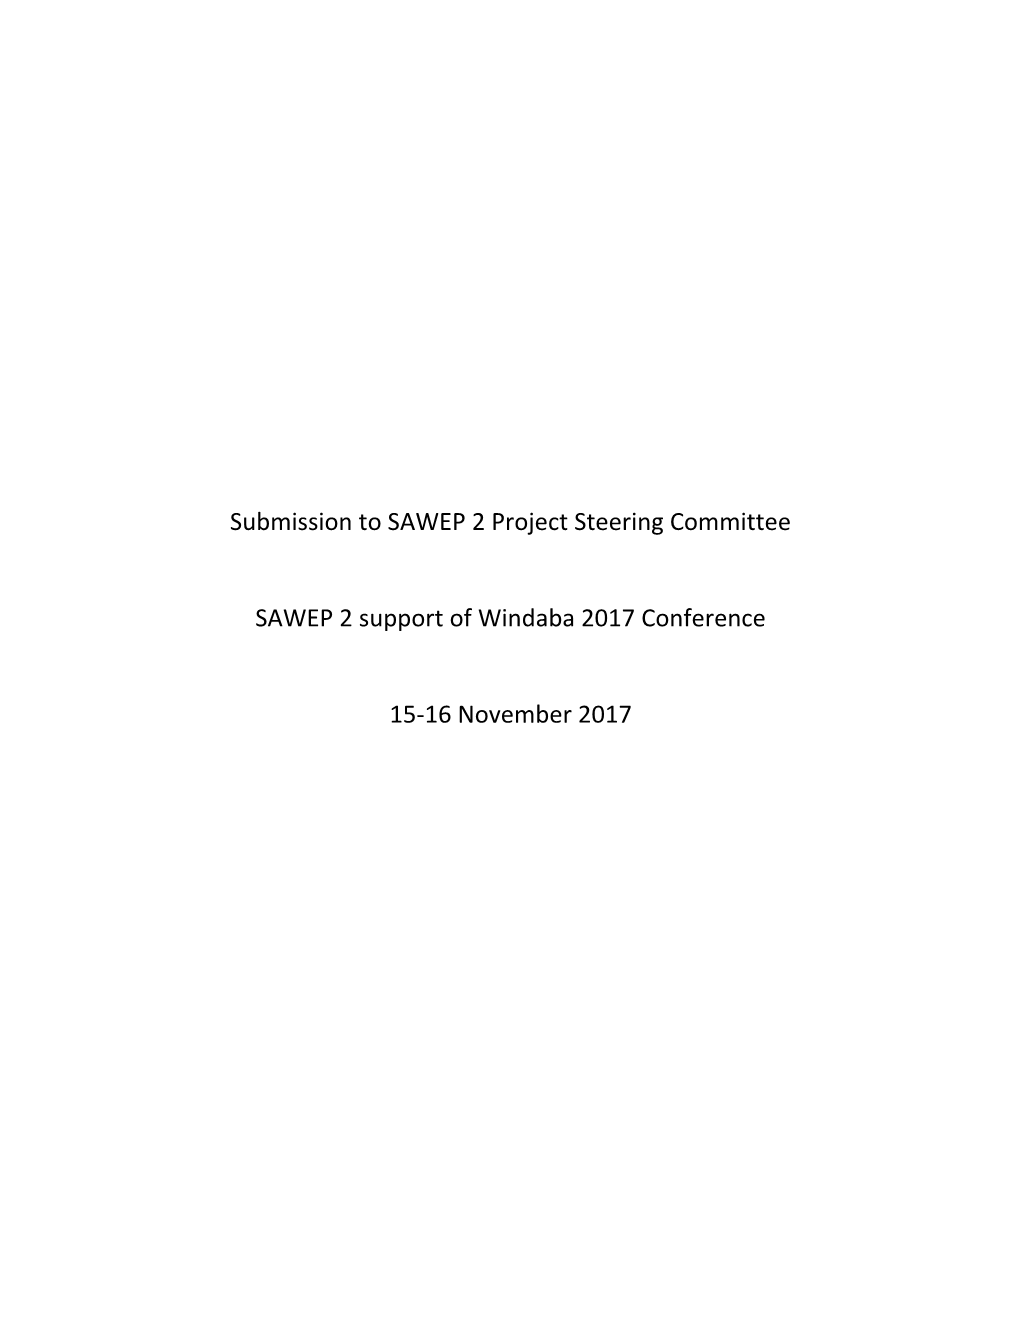 Submission to SAWEP 2 Project Steering Committee